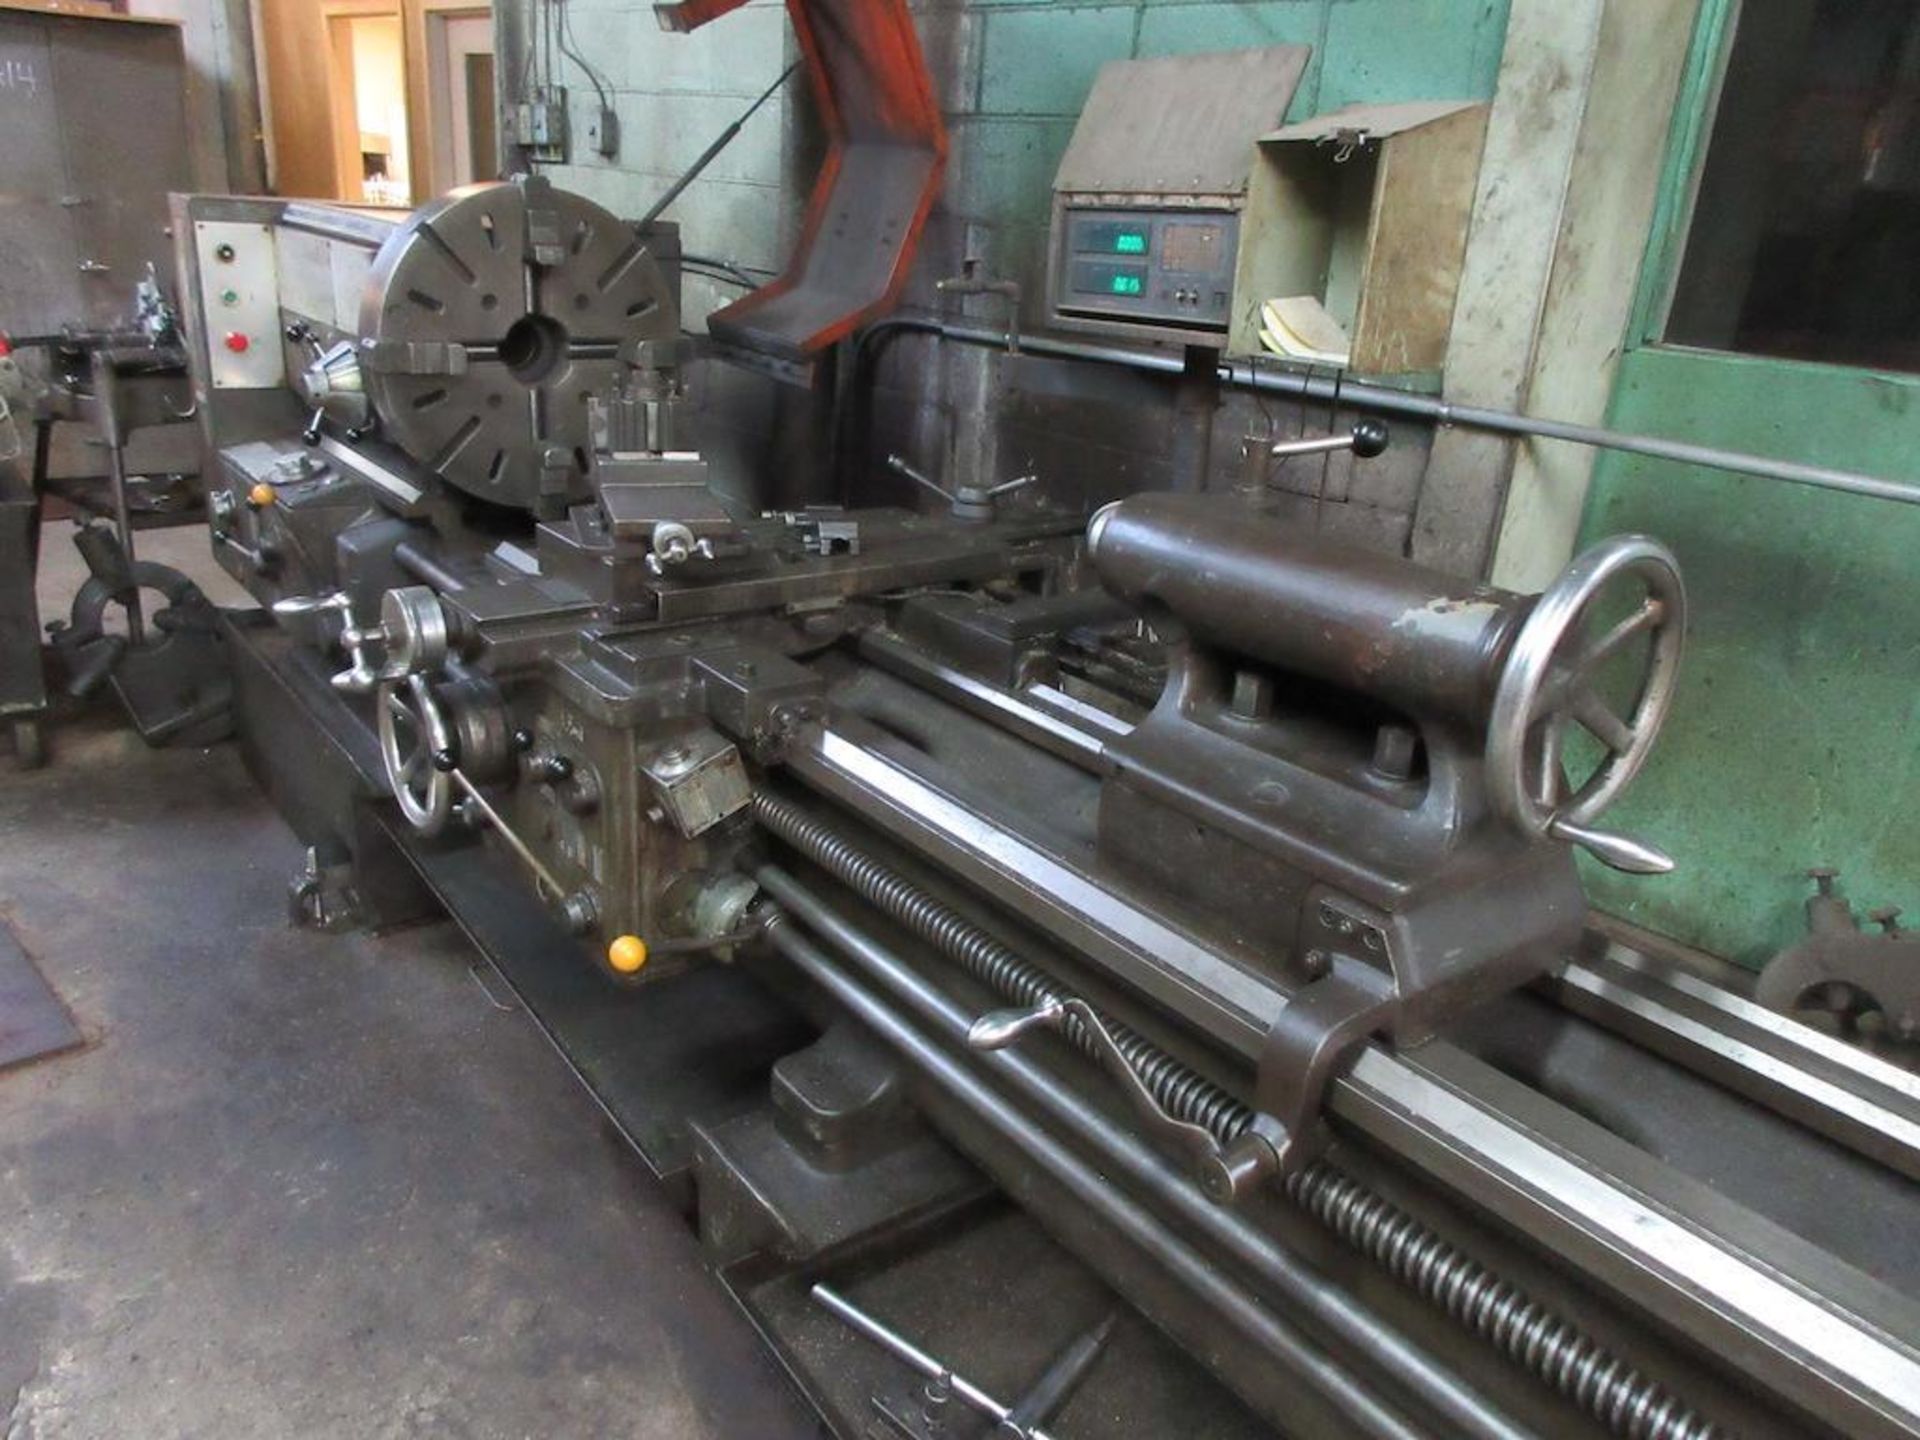 VDF 24" X 10' LATHE, 22" 4 JAW CHUCK, 3 1/4" BORE, TAILSTOCK, STEADY REST, FOLLOW REST, TOOL POSTS, - Image 2 of 16